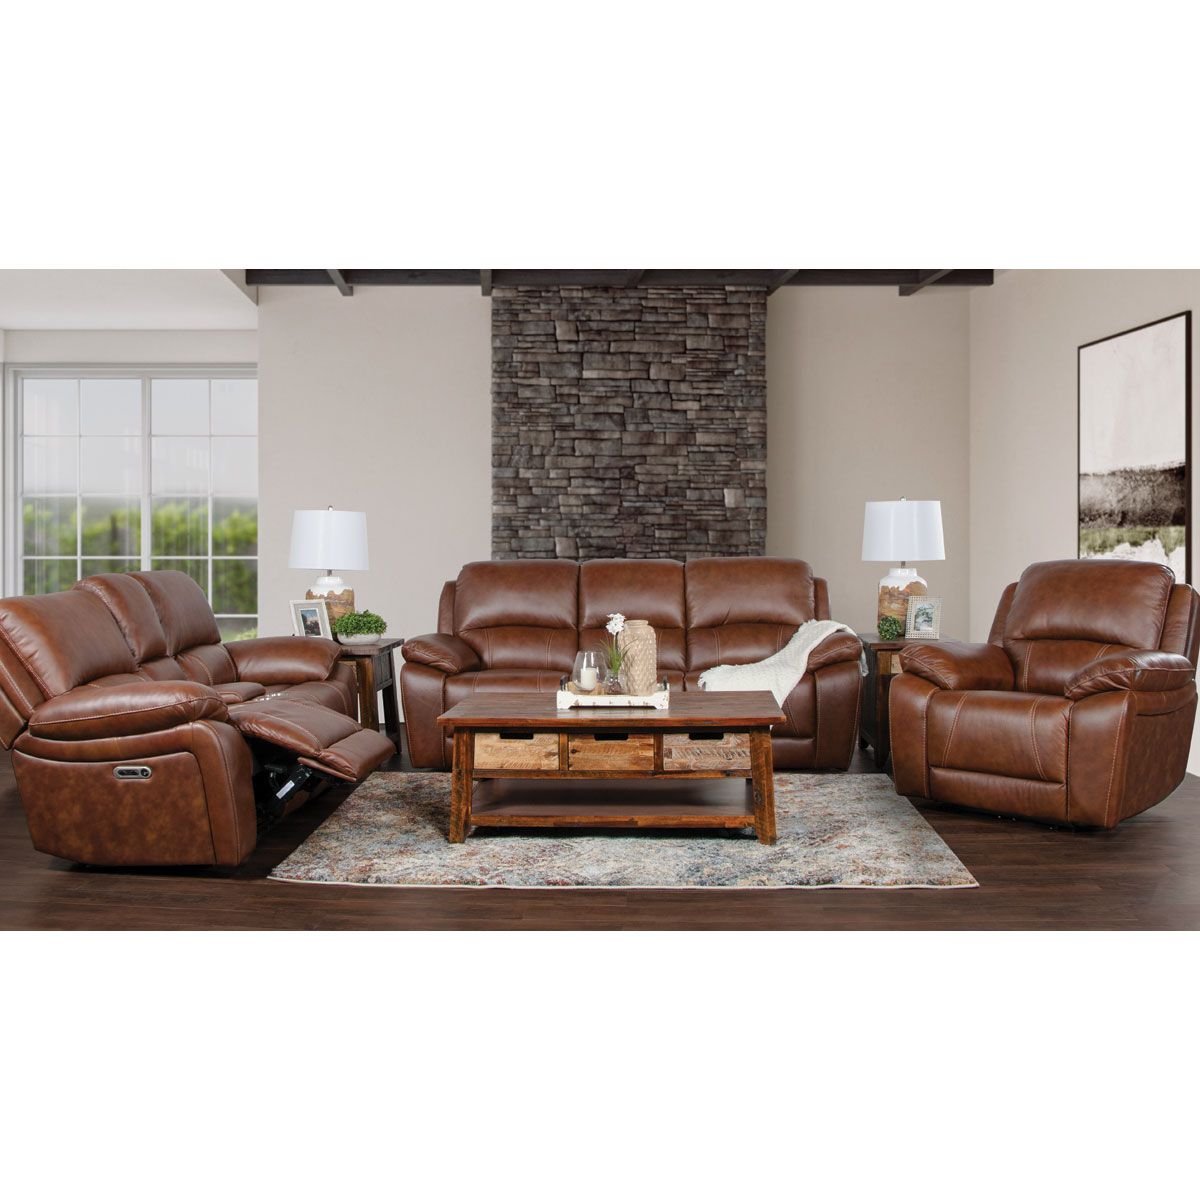 Bryant Leather Power Reclining Sofa